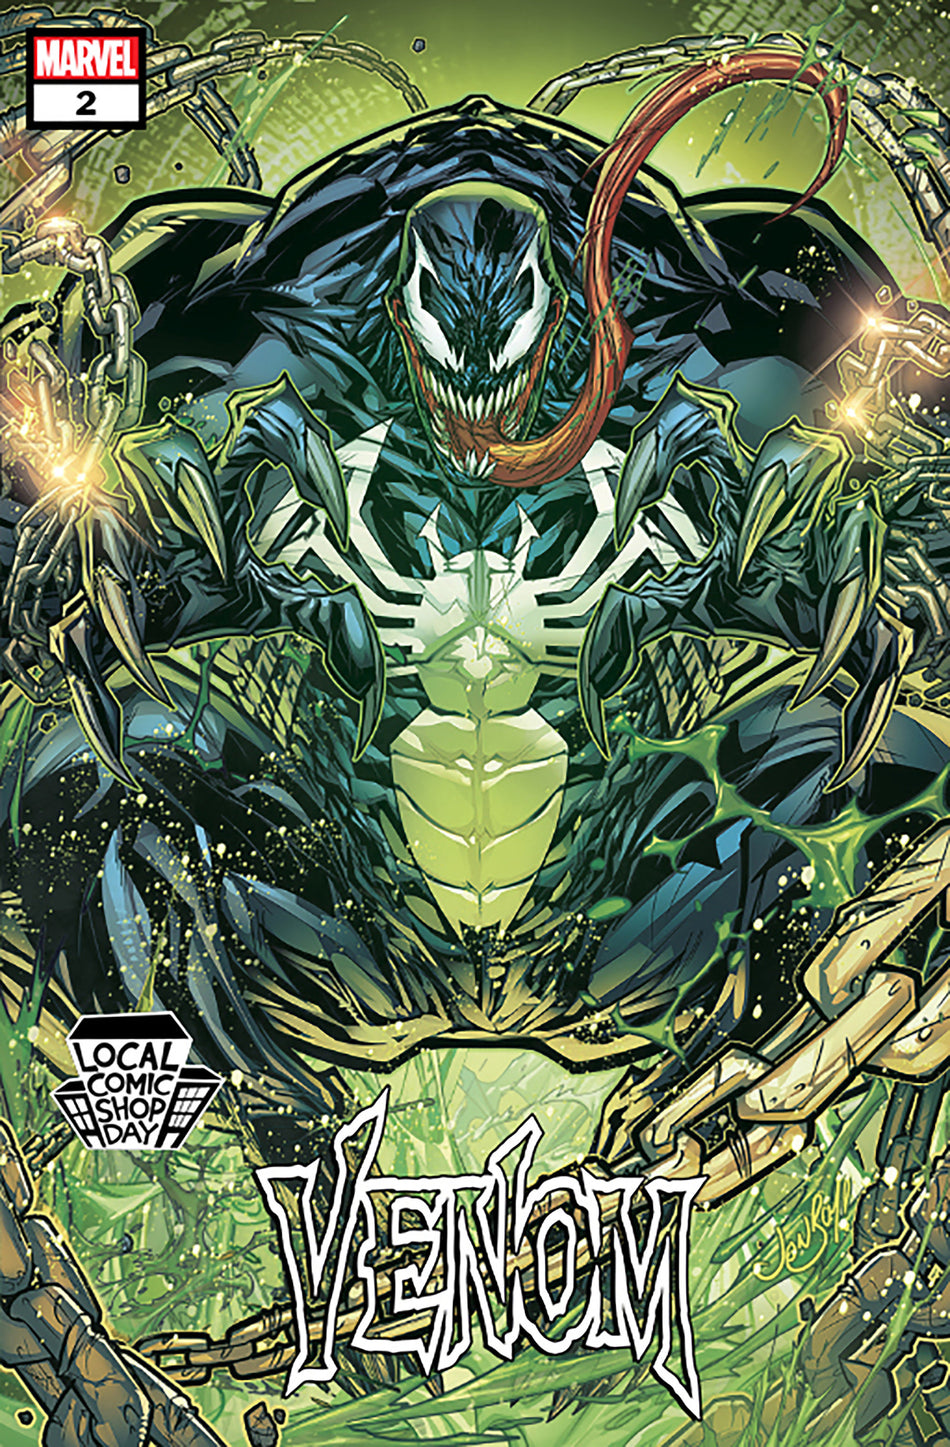 Image of Venom 2 Jonboy Meyers Lcsd Local Comic Shop Day Variant comic sold by Stronghold Collectibles.